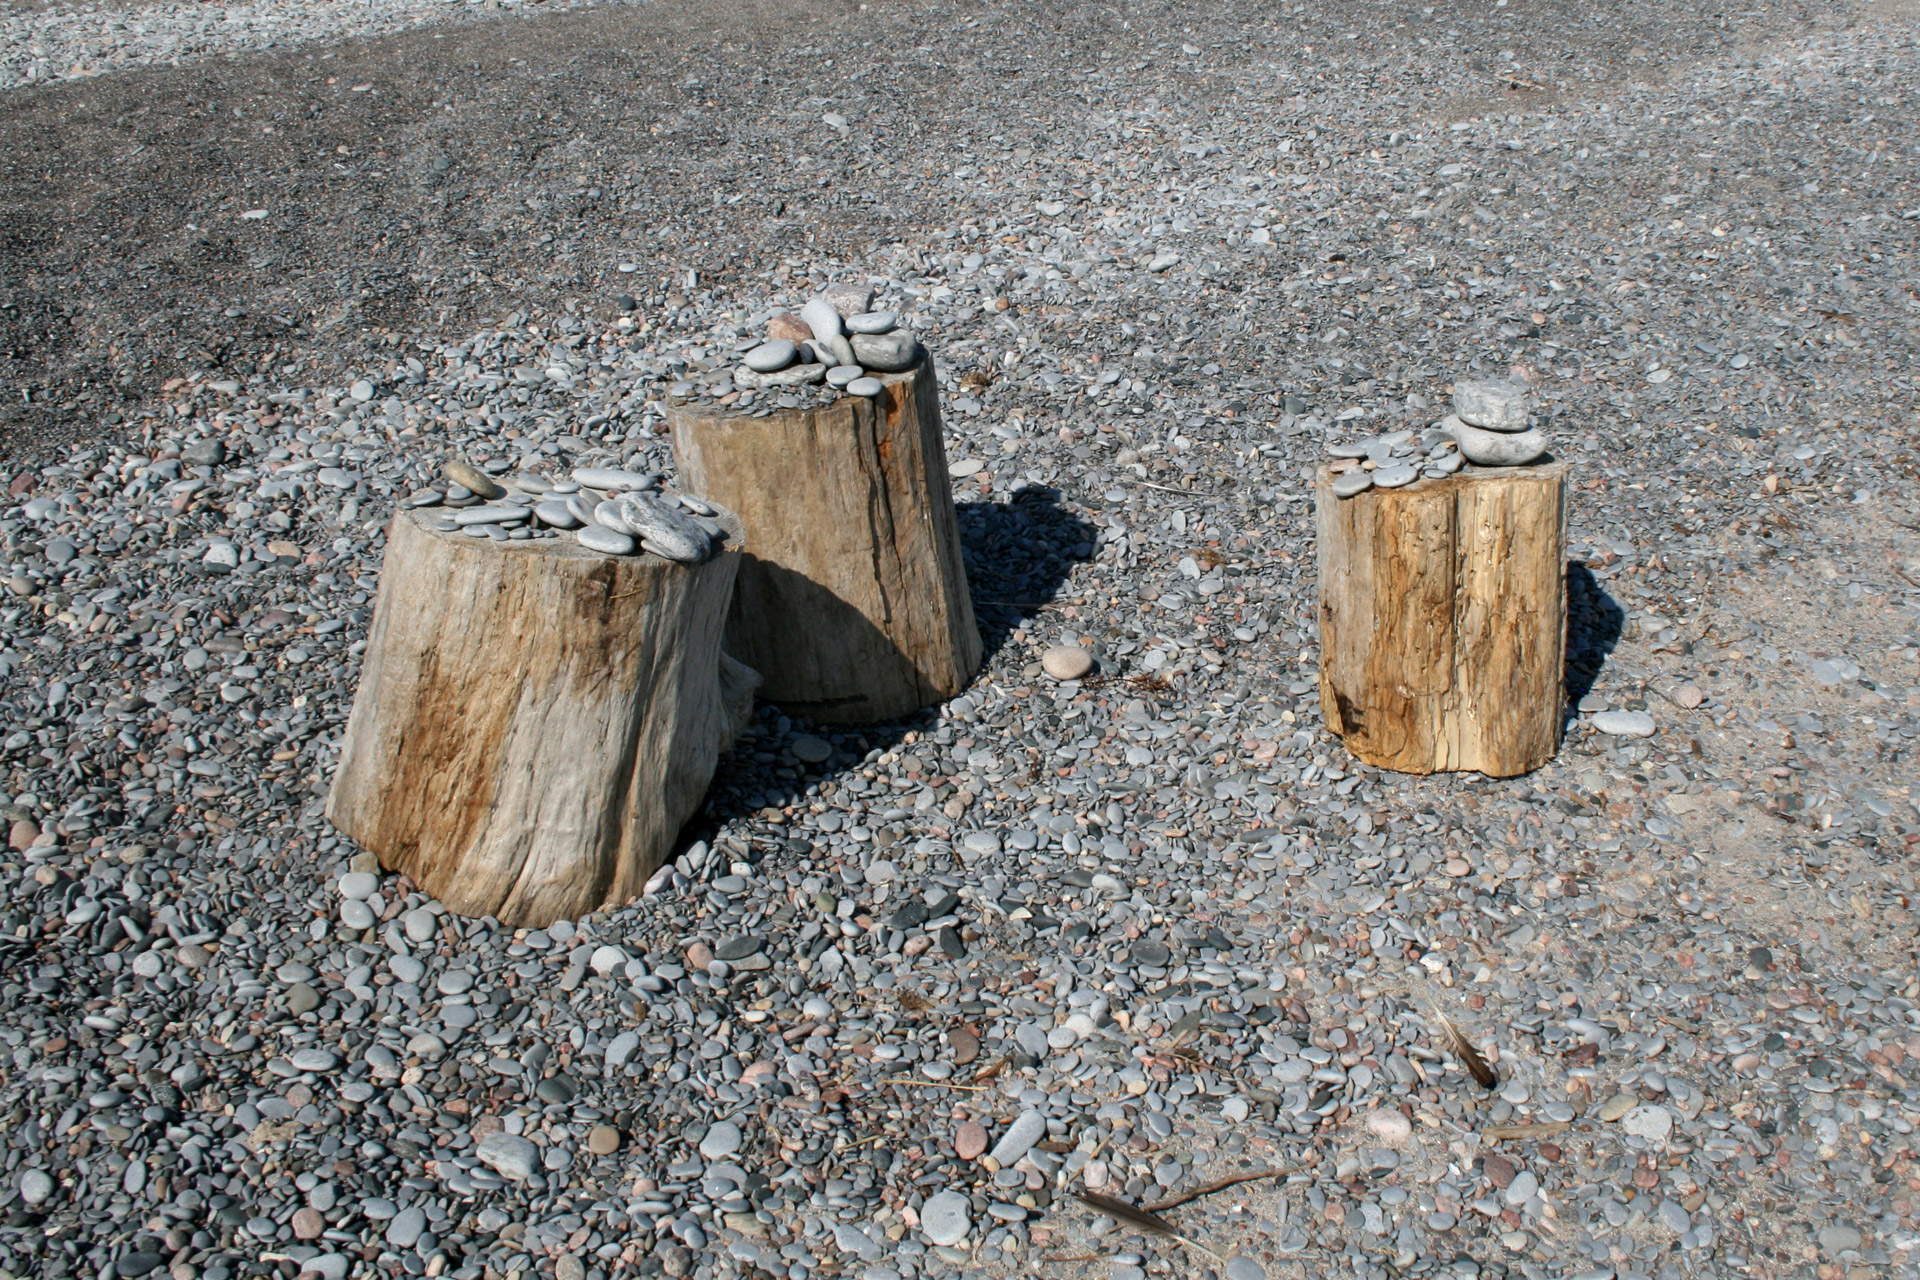 Tree stumps on the shore with stones placed on them.